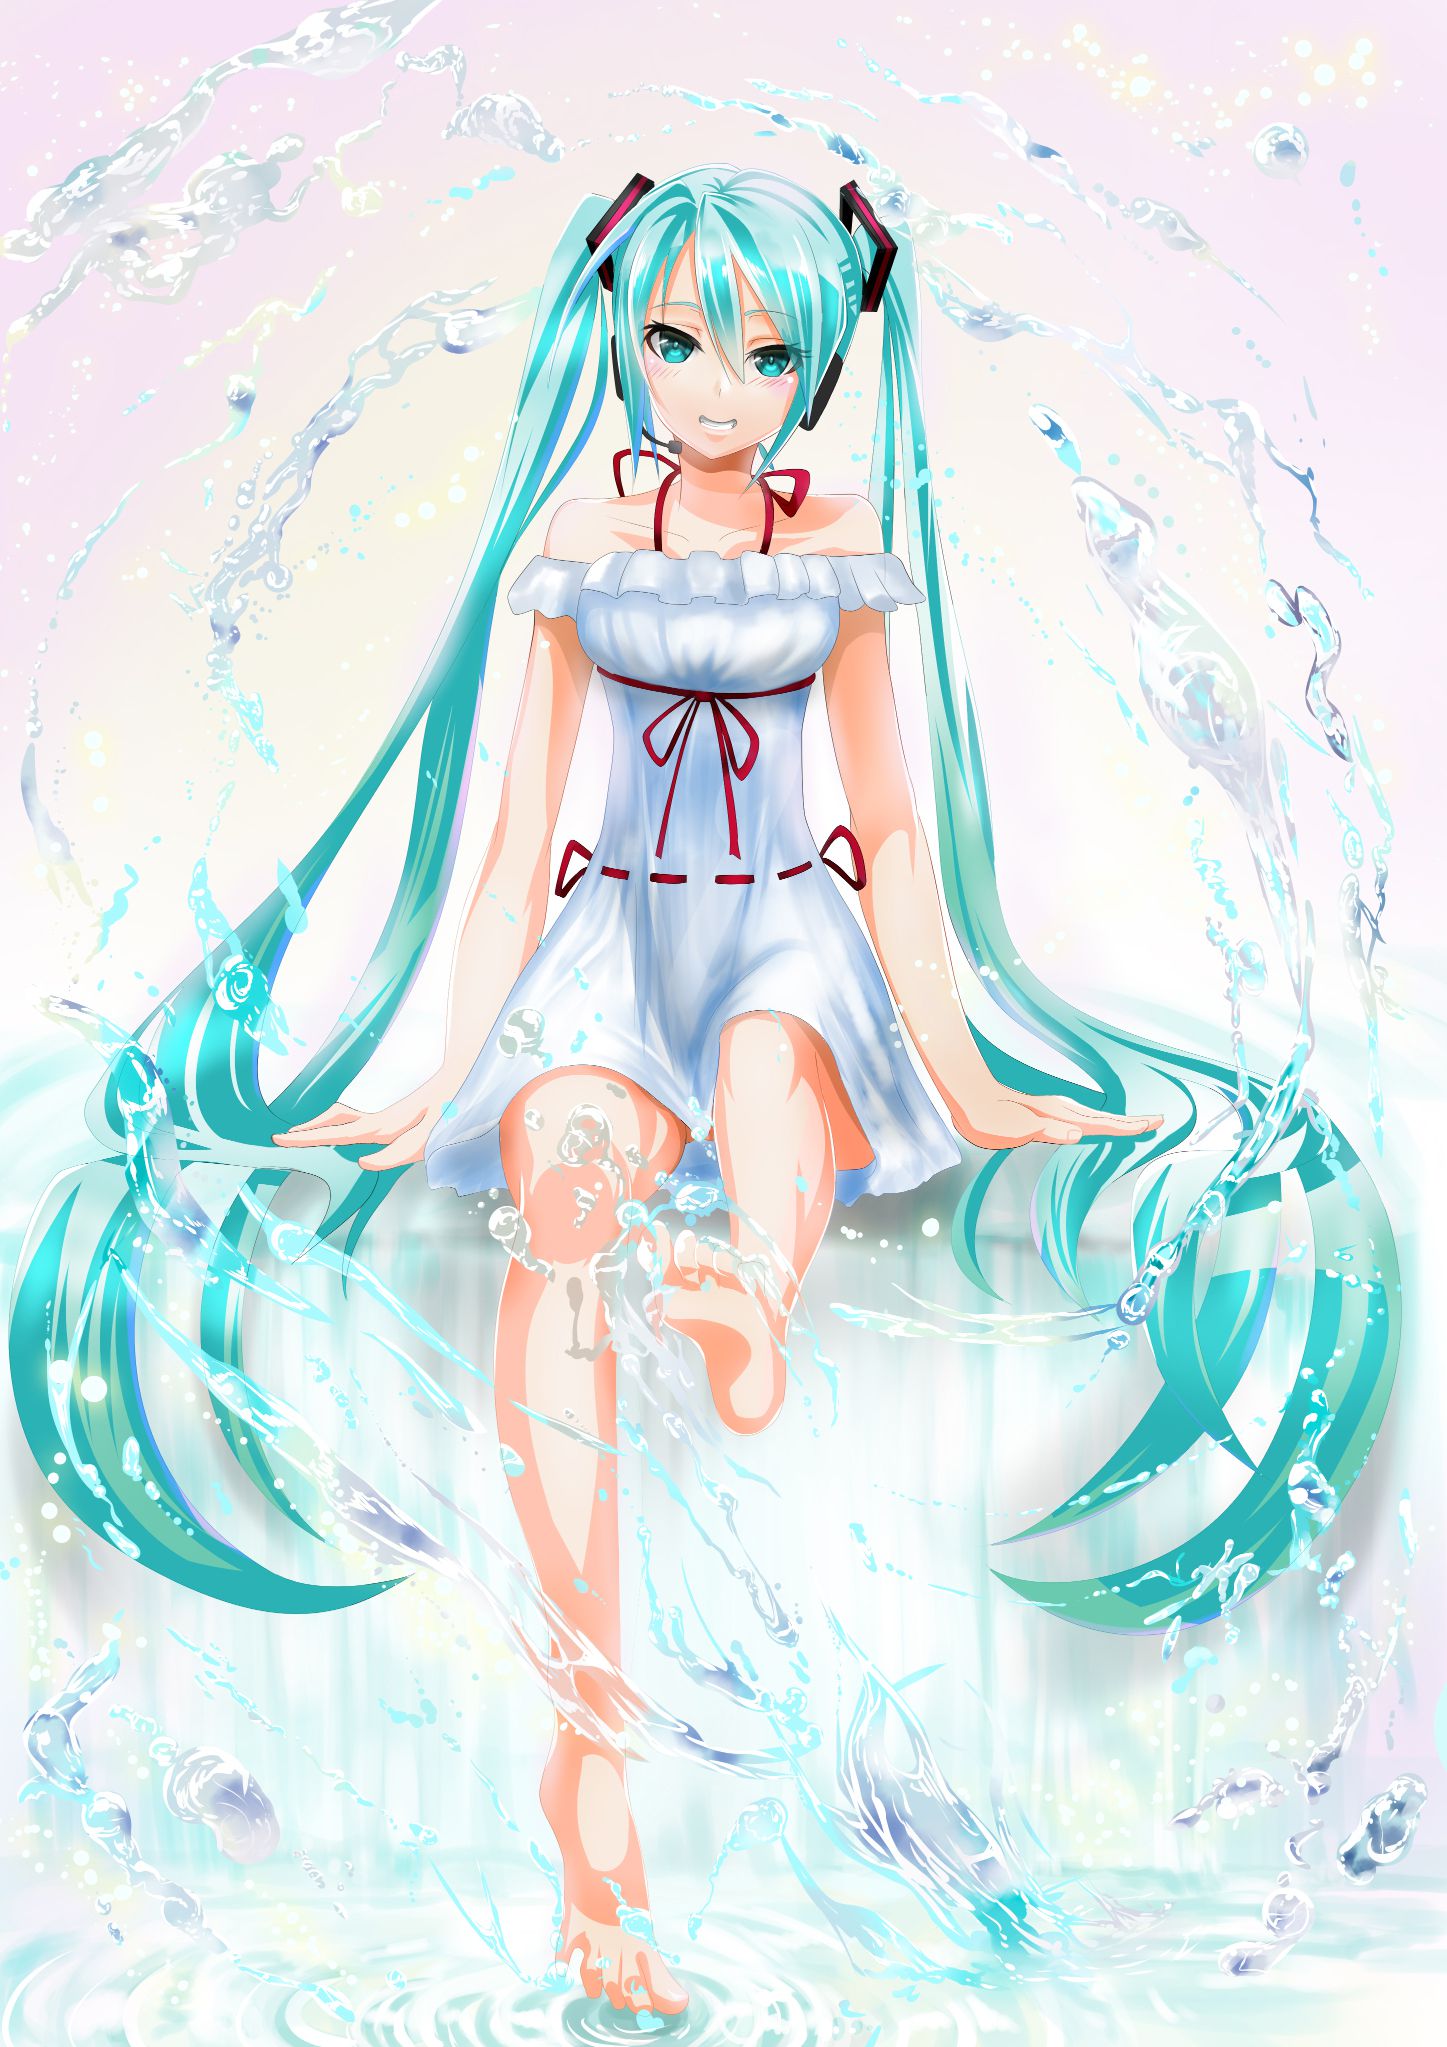 Assorted Miku images after a long absence. 5